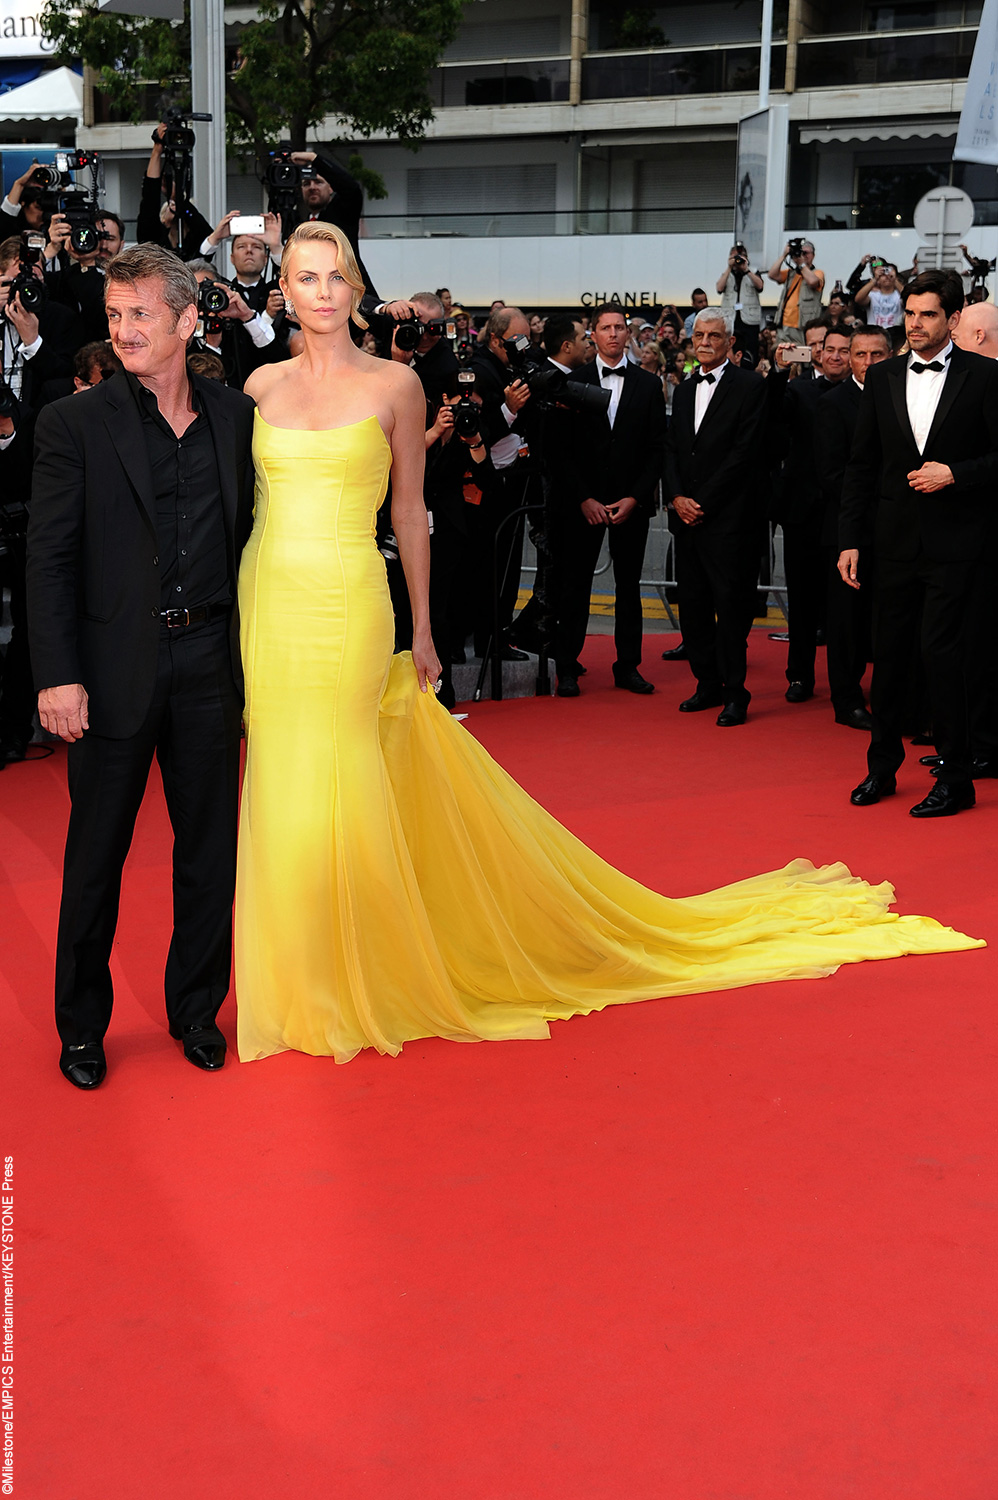 Charlize Theron had all eyes on her when she wore a bright yellow strapless gown to the Mad Max: Fury Road premiere. Walking the carpet with Sean Penn, Charlize looked like old Hollywood glamour in her Dior gown and large jewelled earrings.